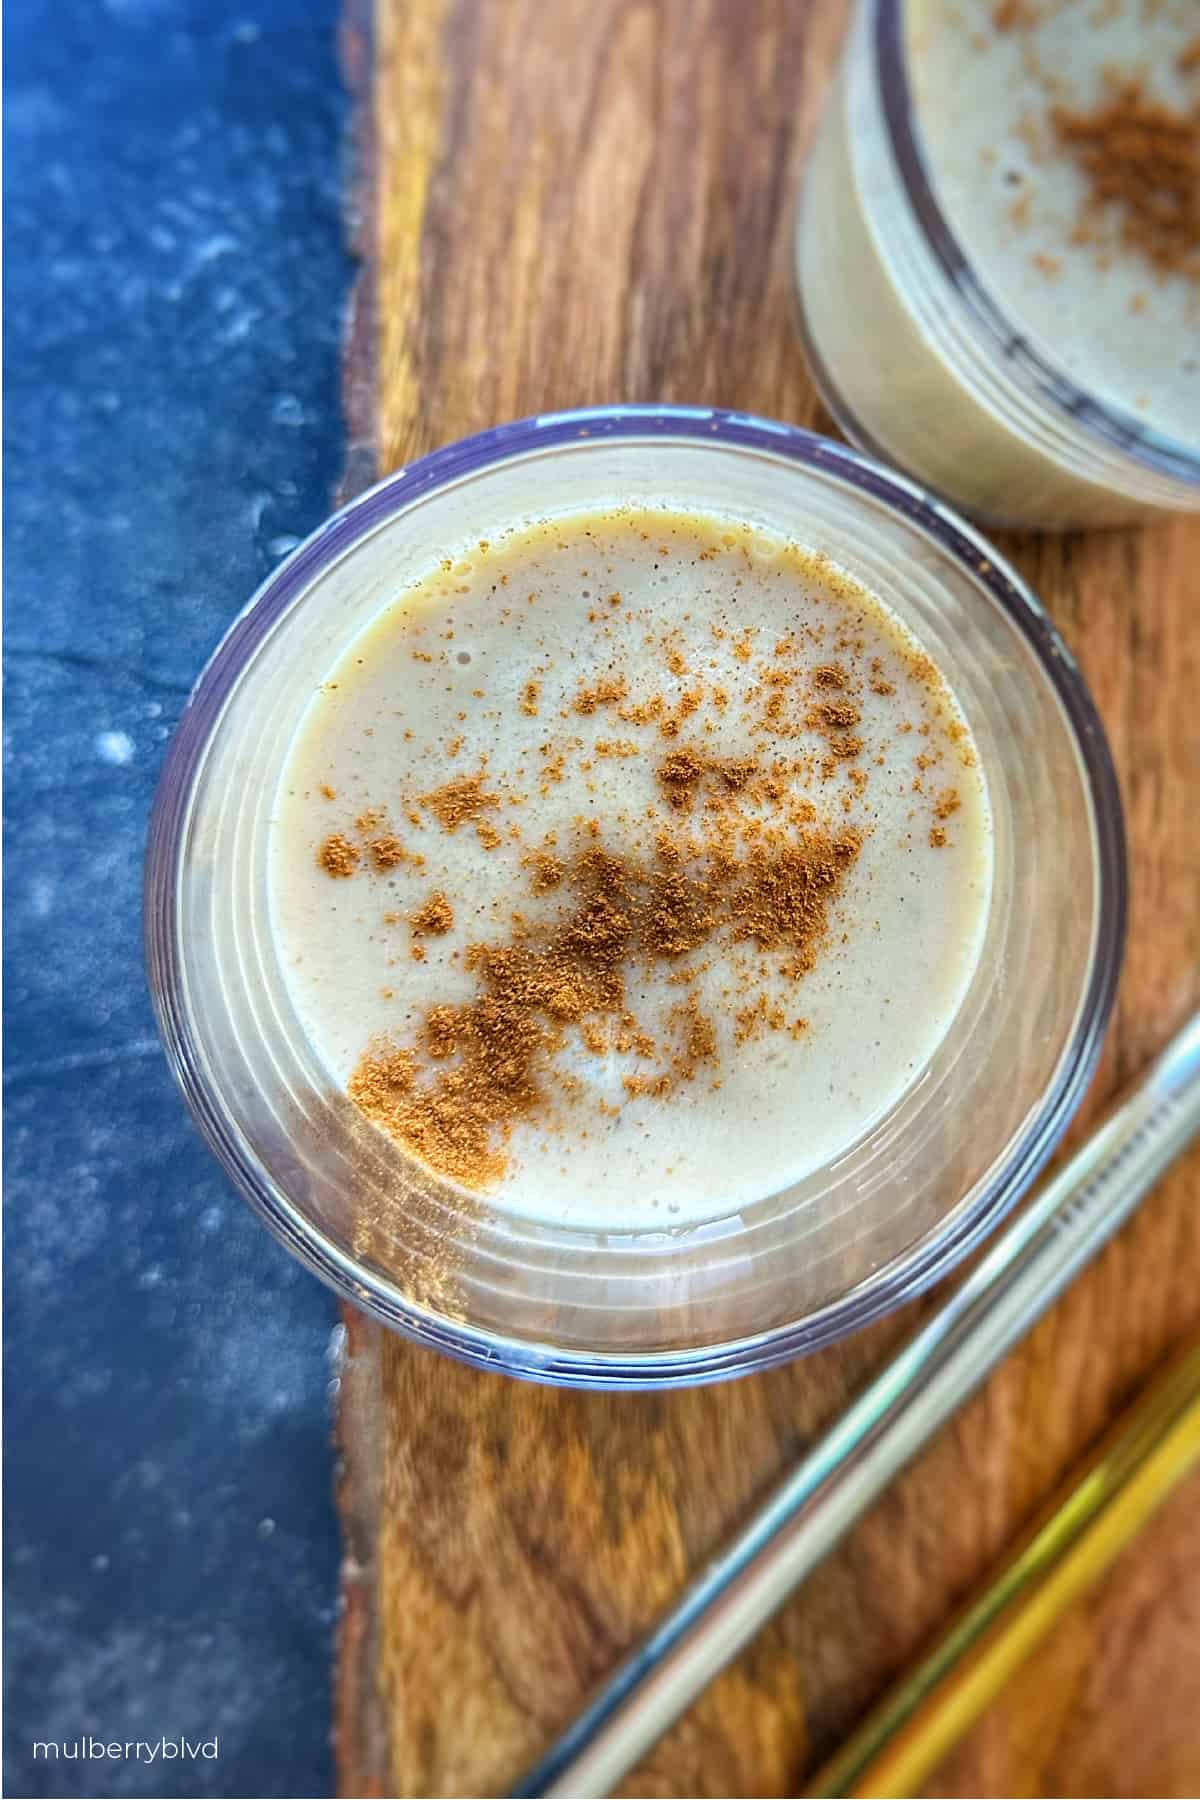 Close up of a completed caramelized banana smoothie